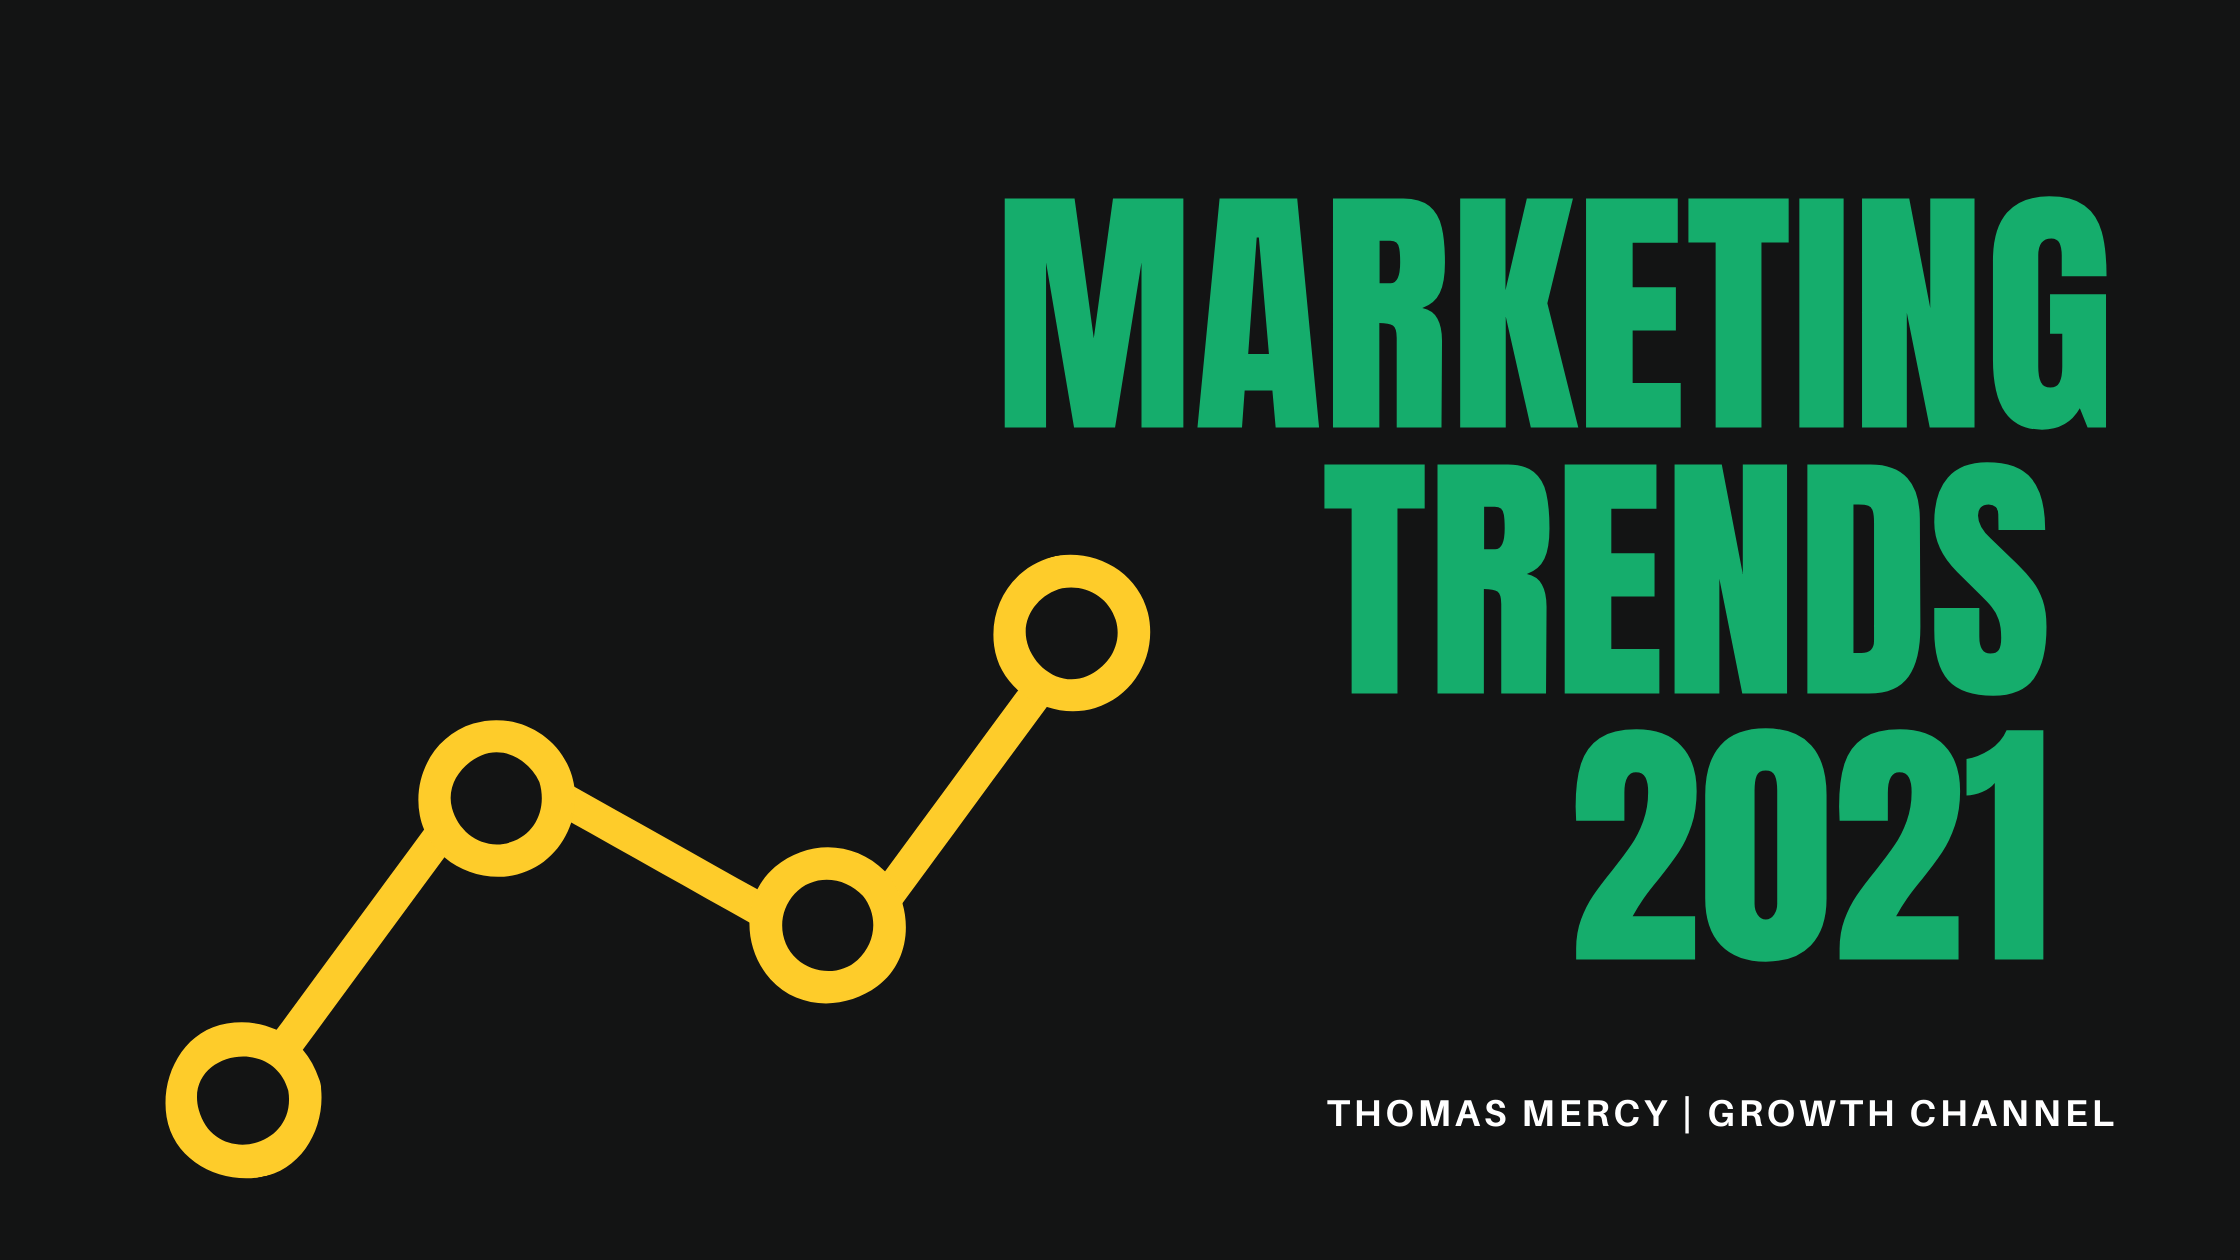 Are You Ready for 2021? Top 13 Marketing Trends To Drive Your 2021 Strategy